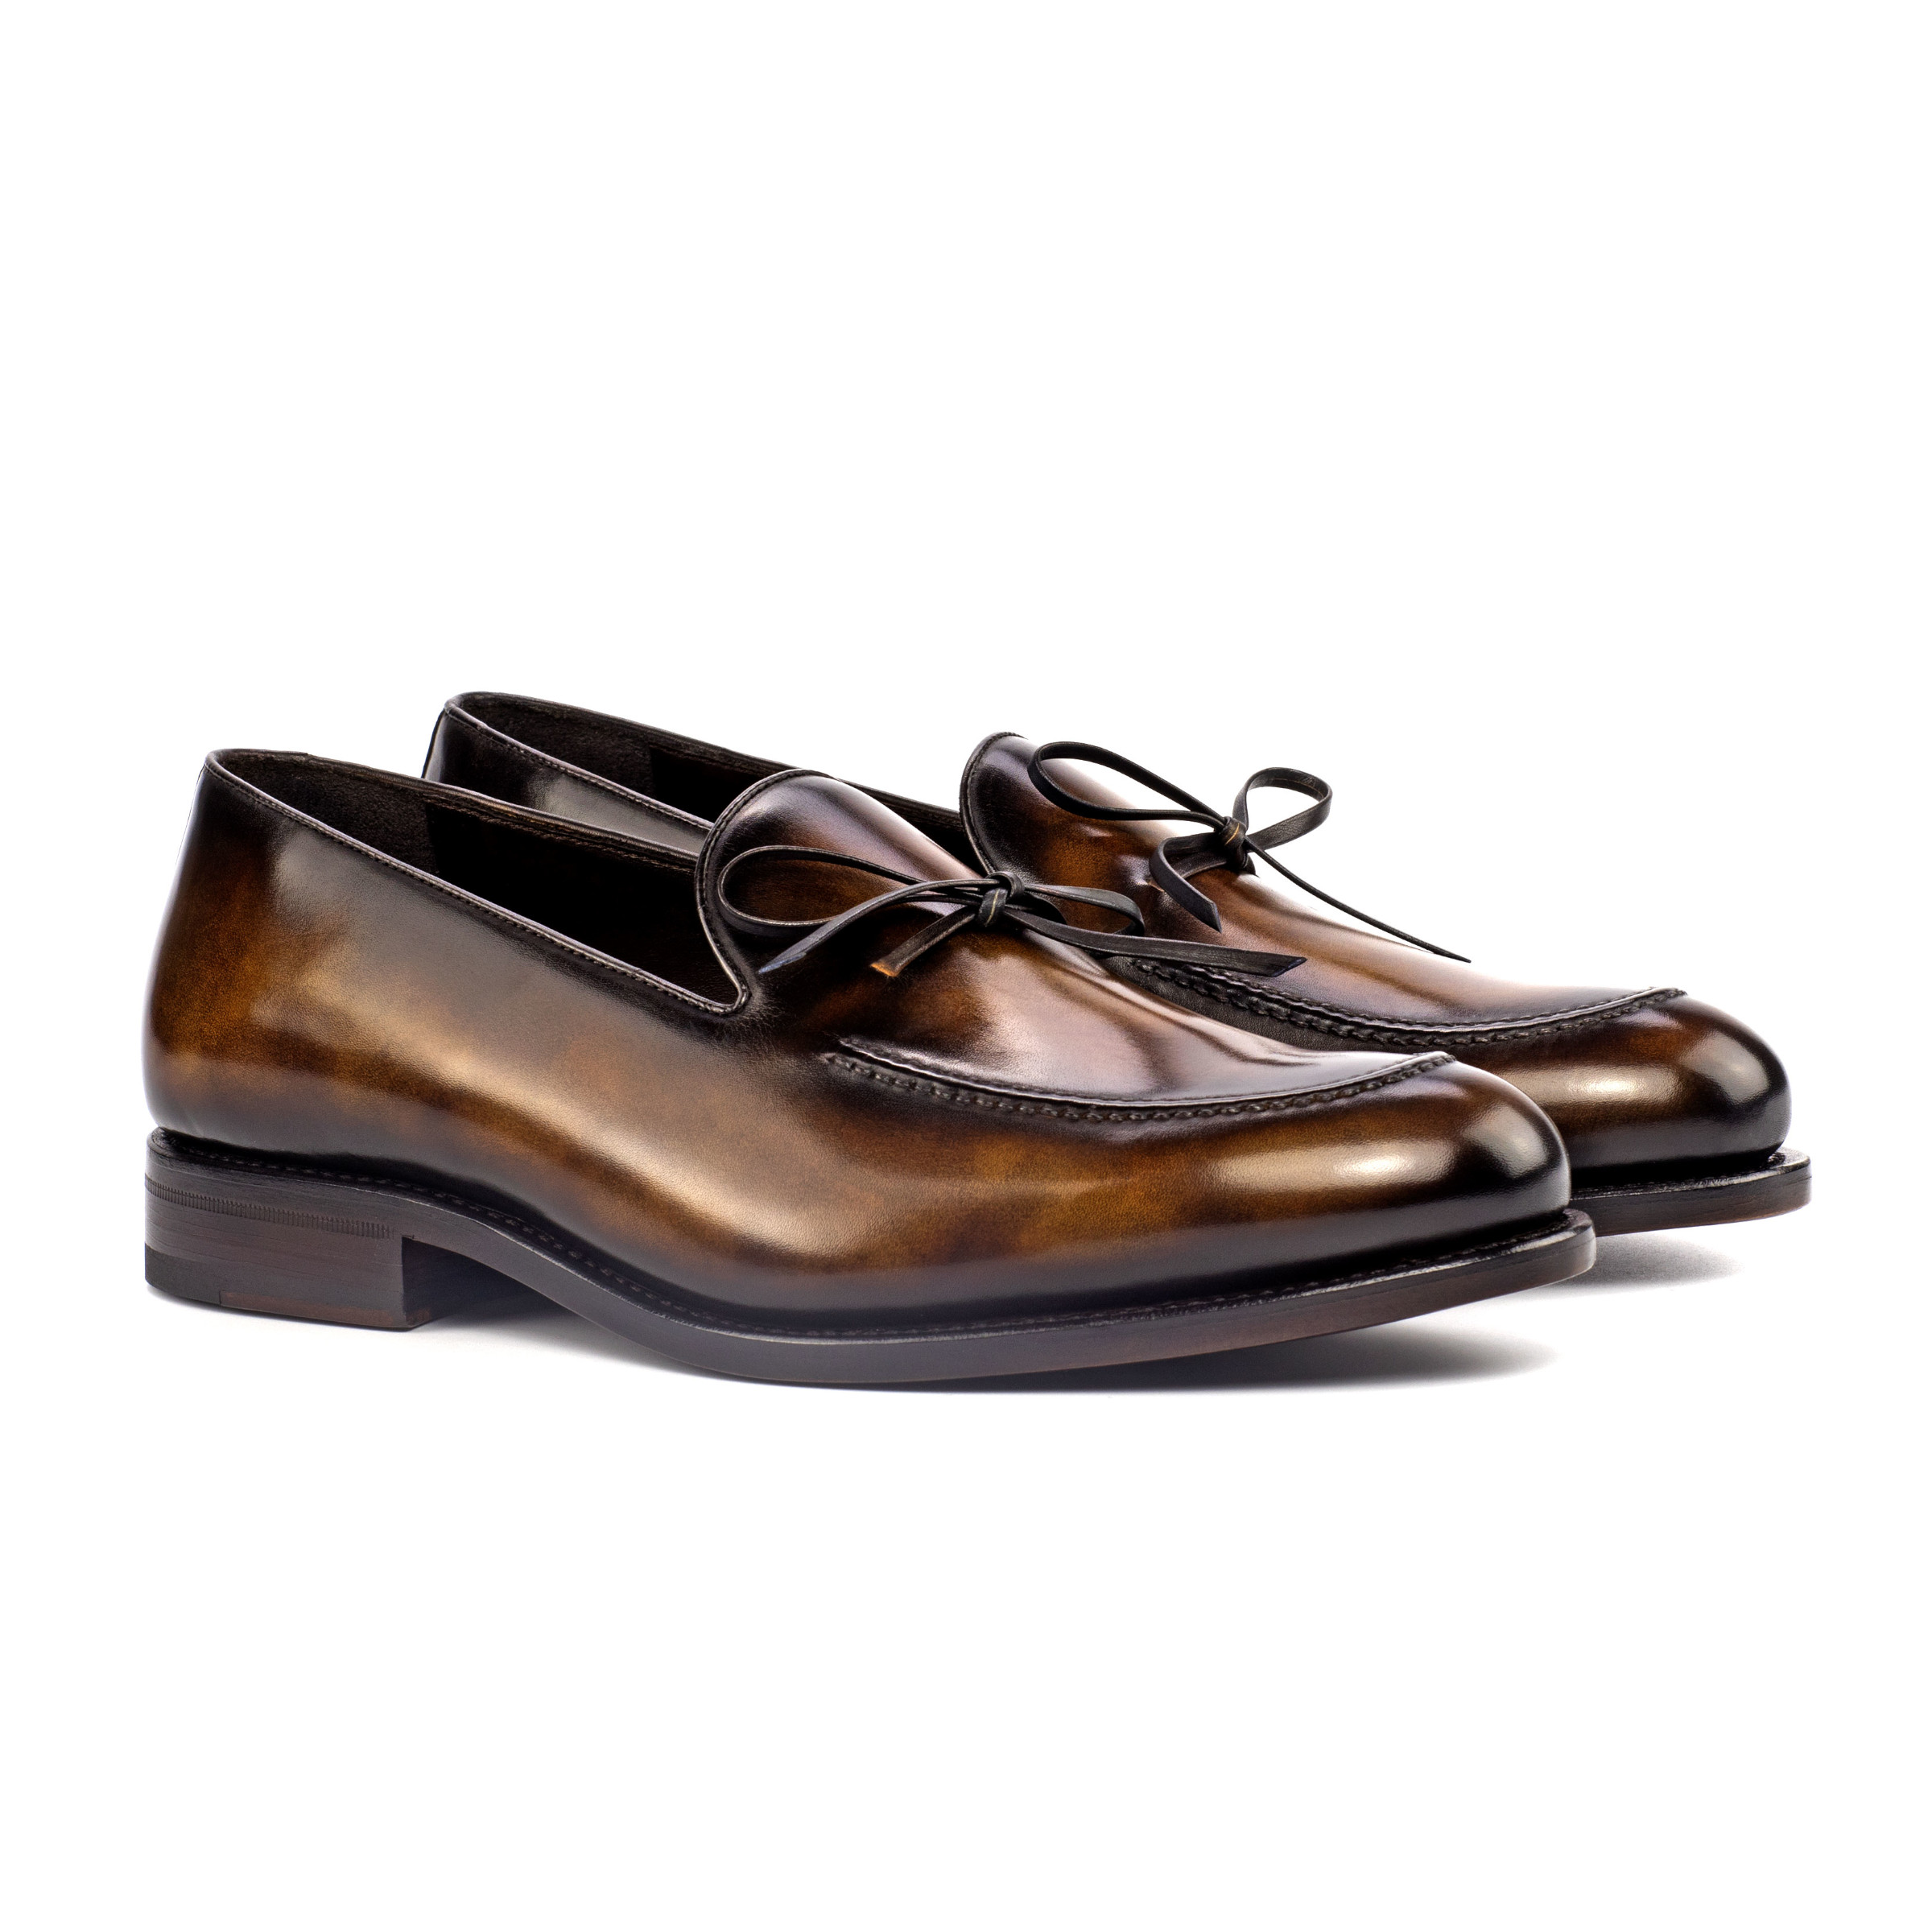 The Richmond: Tobacco Patina. Tobacco colored patina loafers against white background.